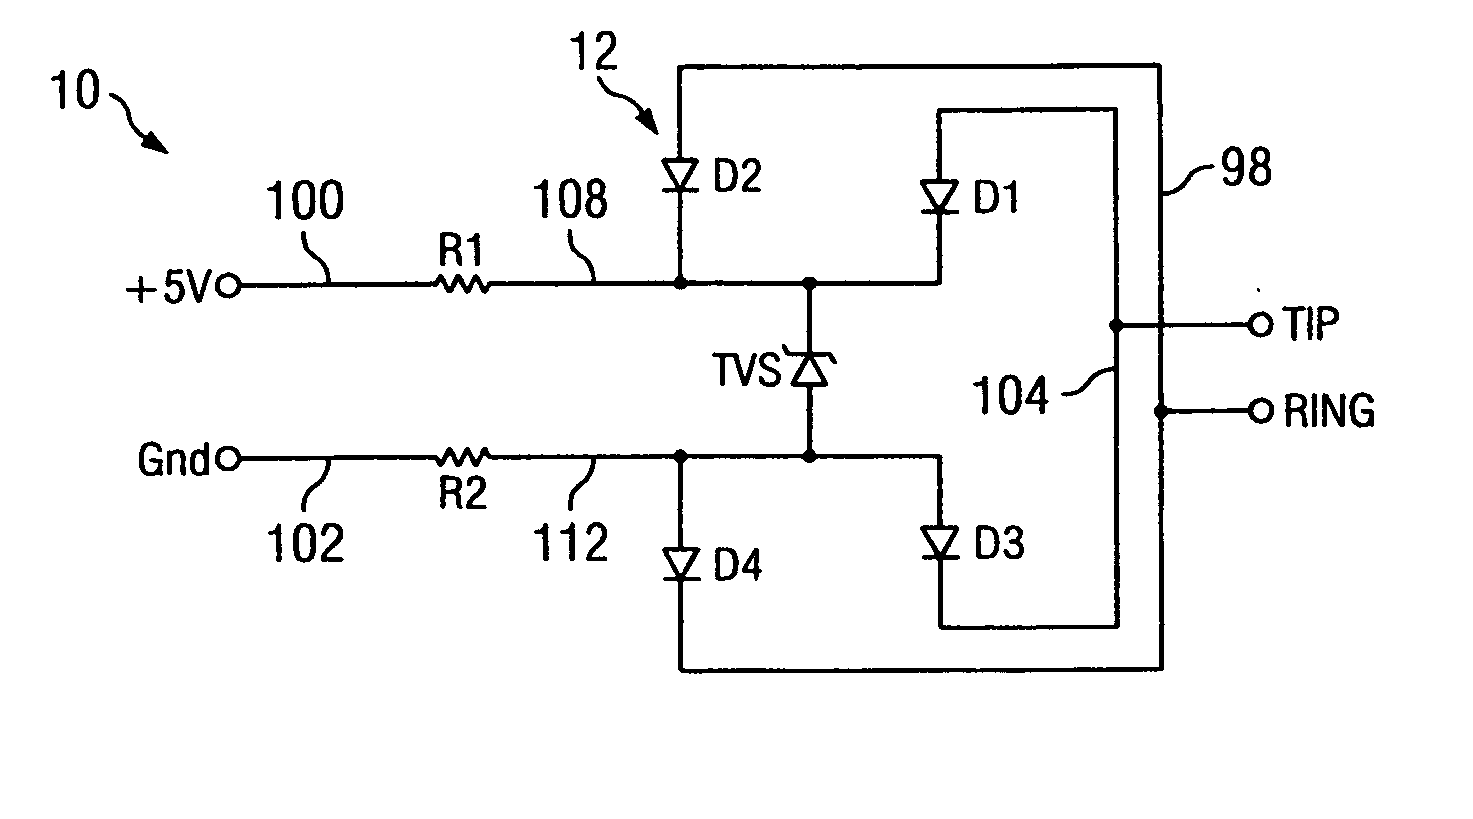 Integrated circuit providing overvoltage protection for low voltage lines